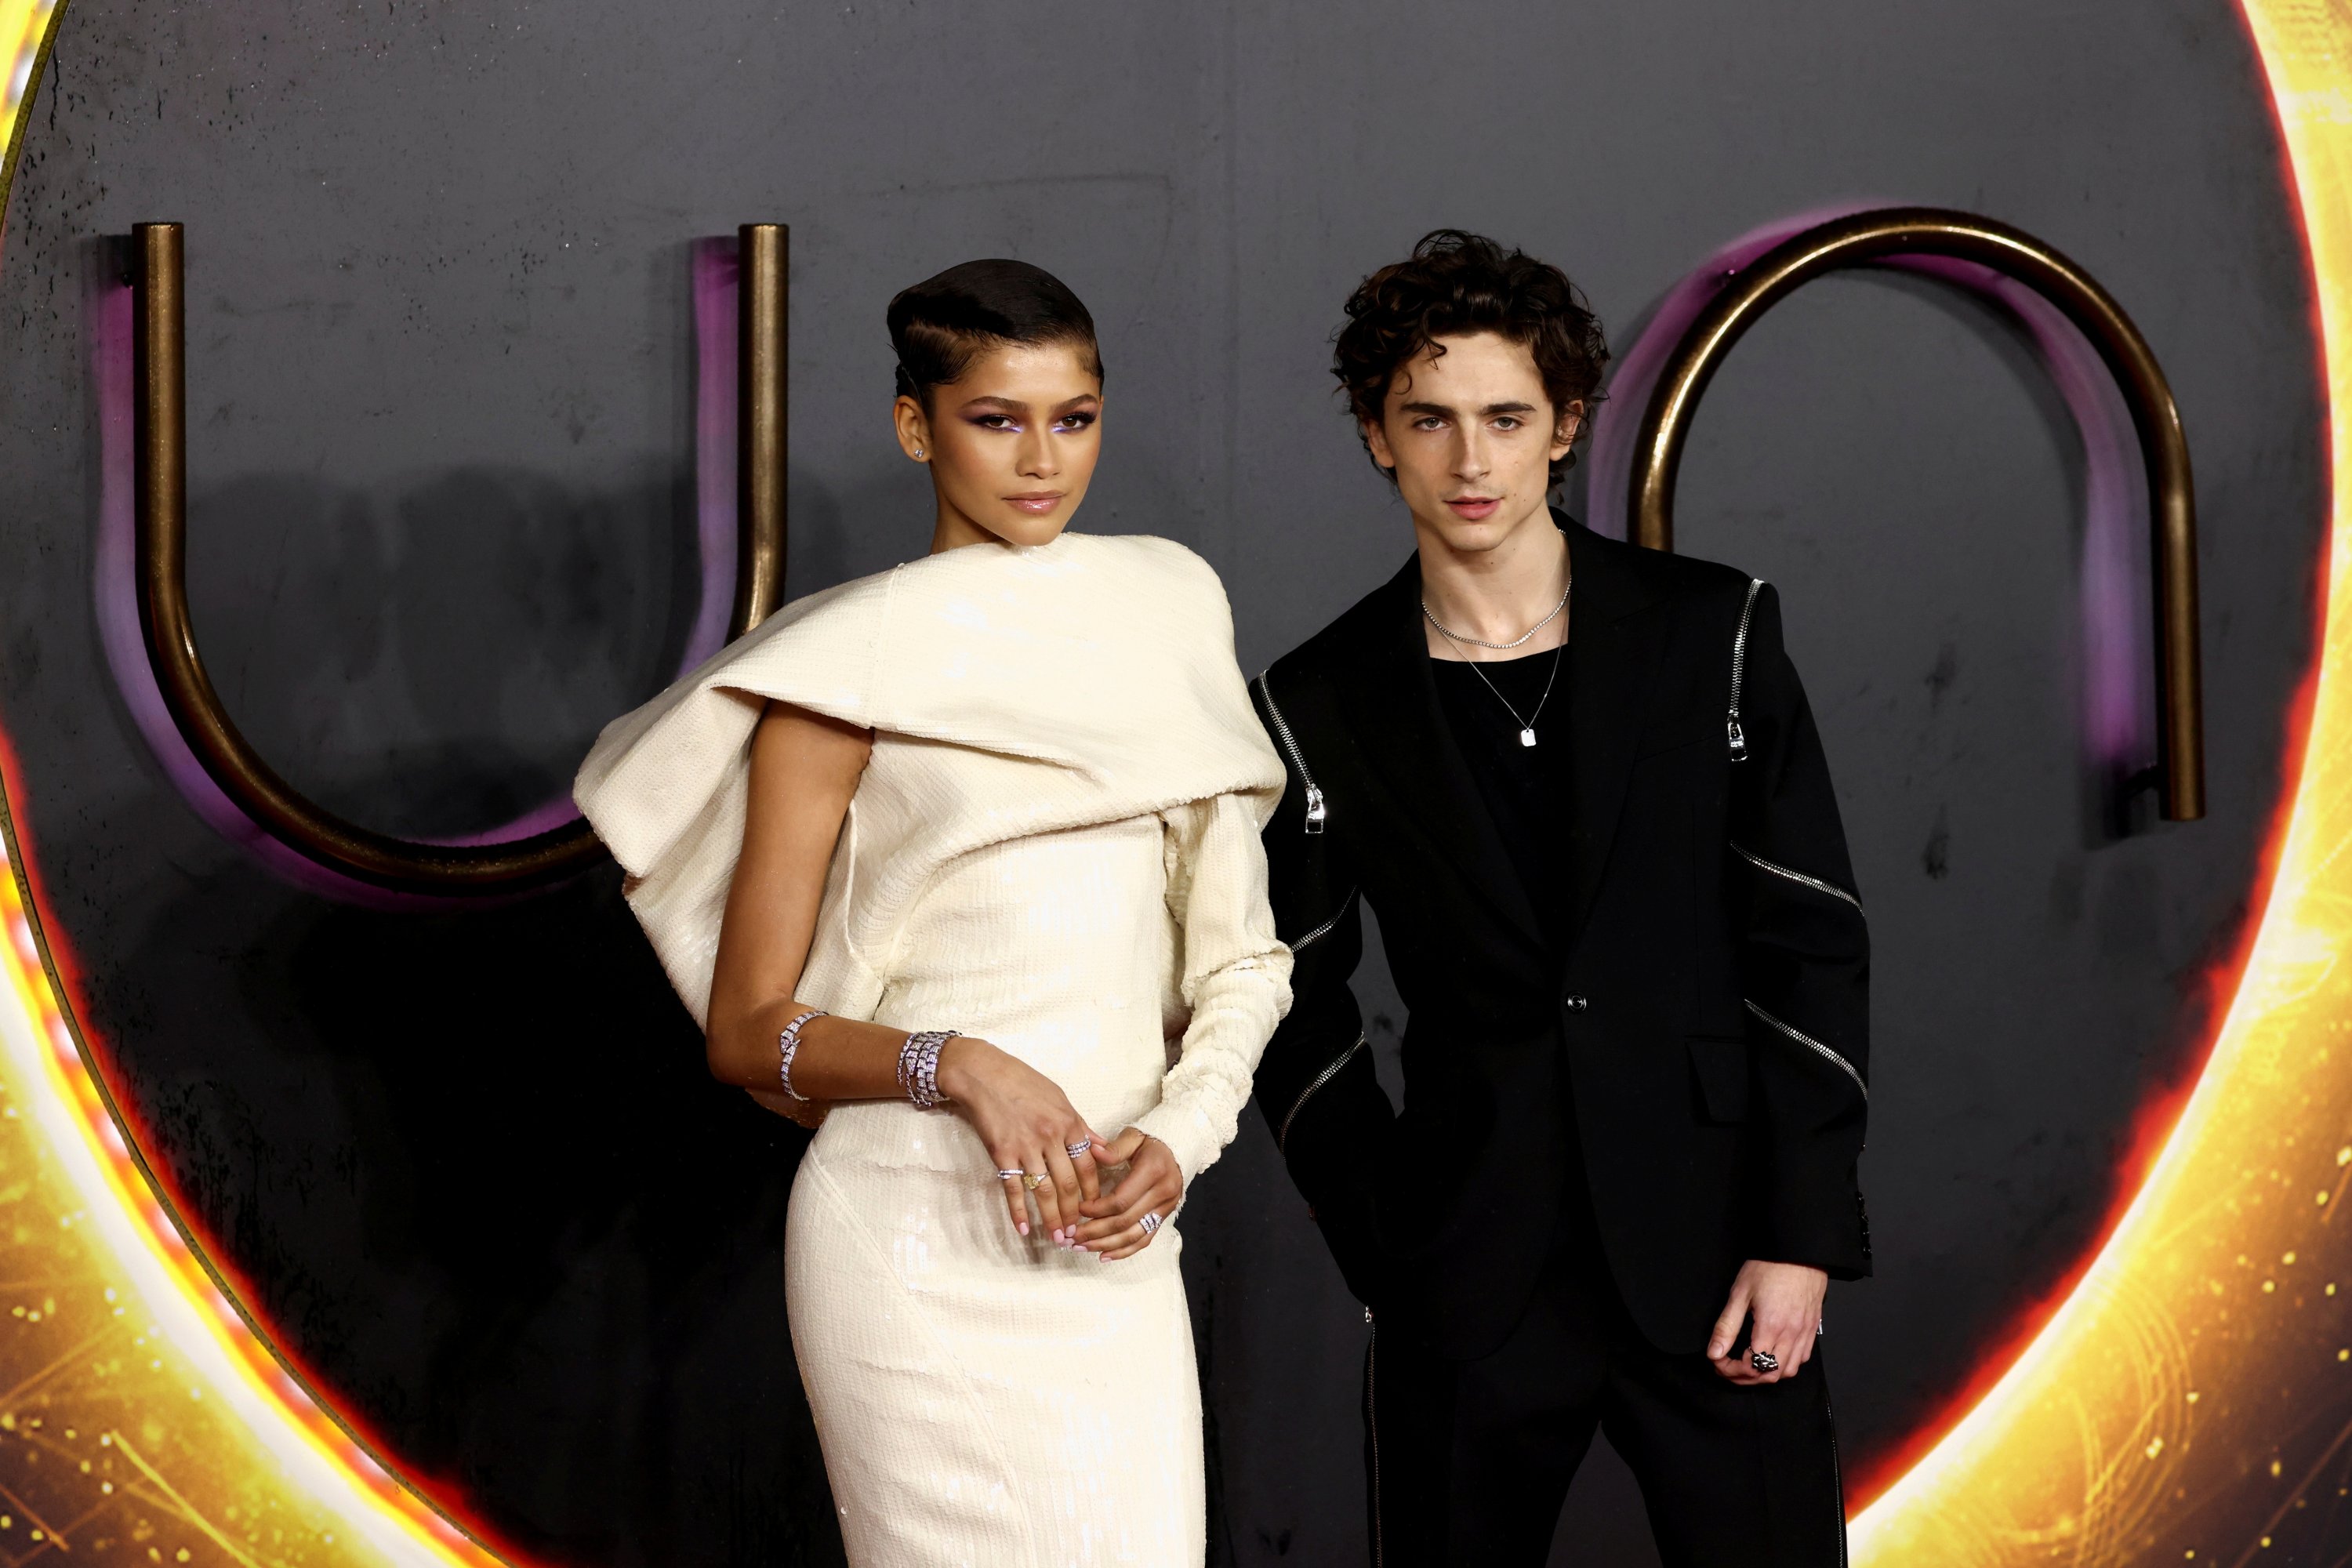 Cast members Zendaya and Timothee Chalamet pose as they arrive for a U.K. screening of the film 